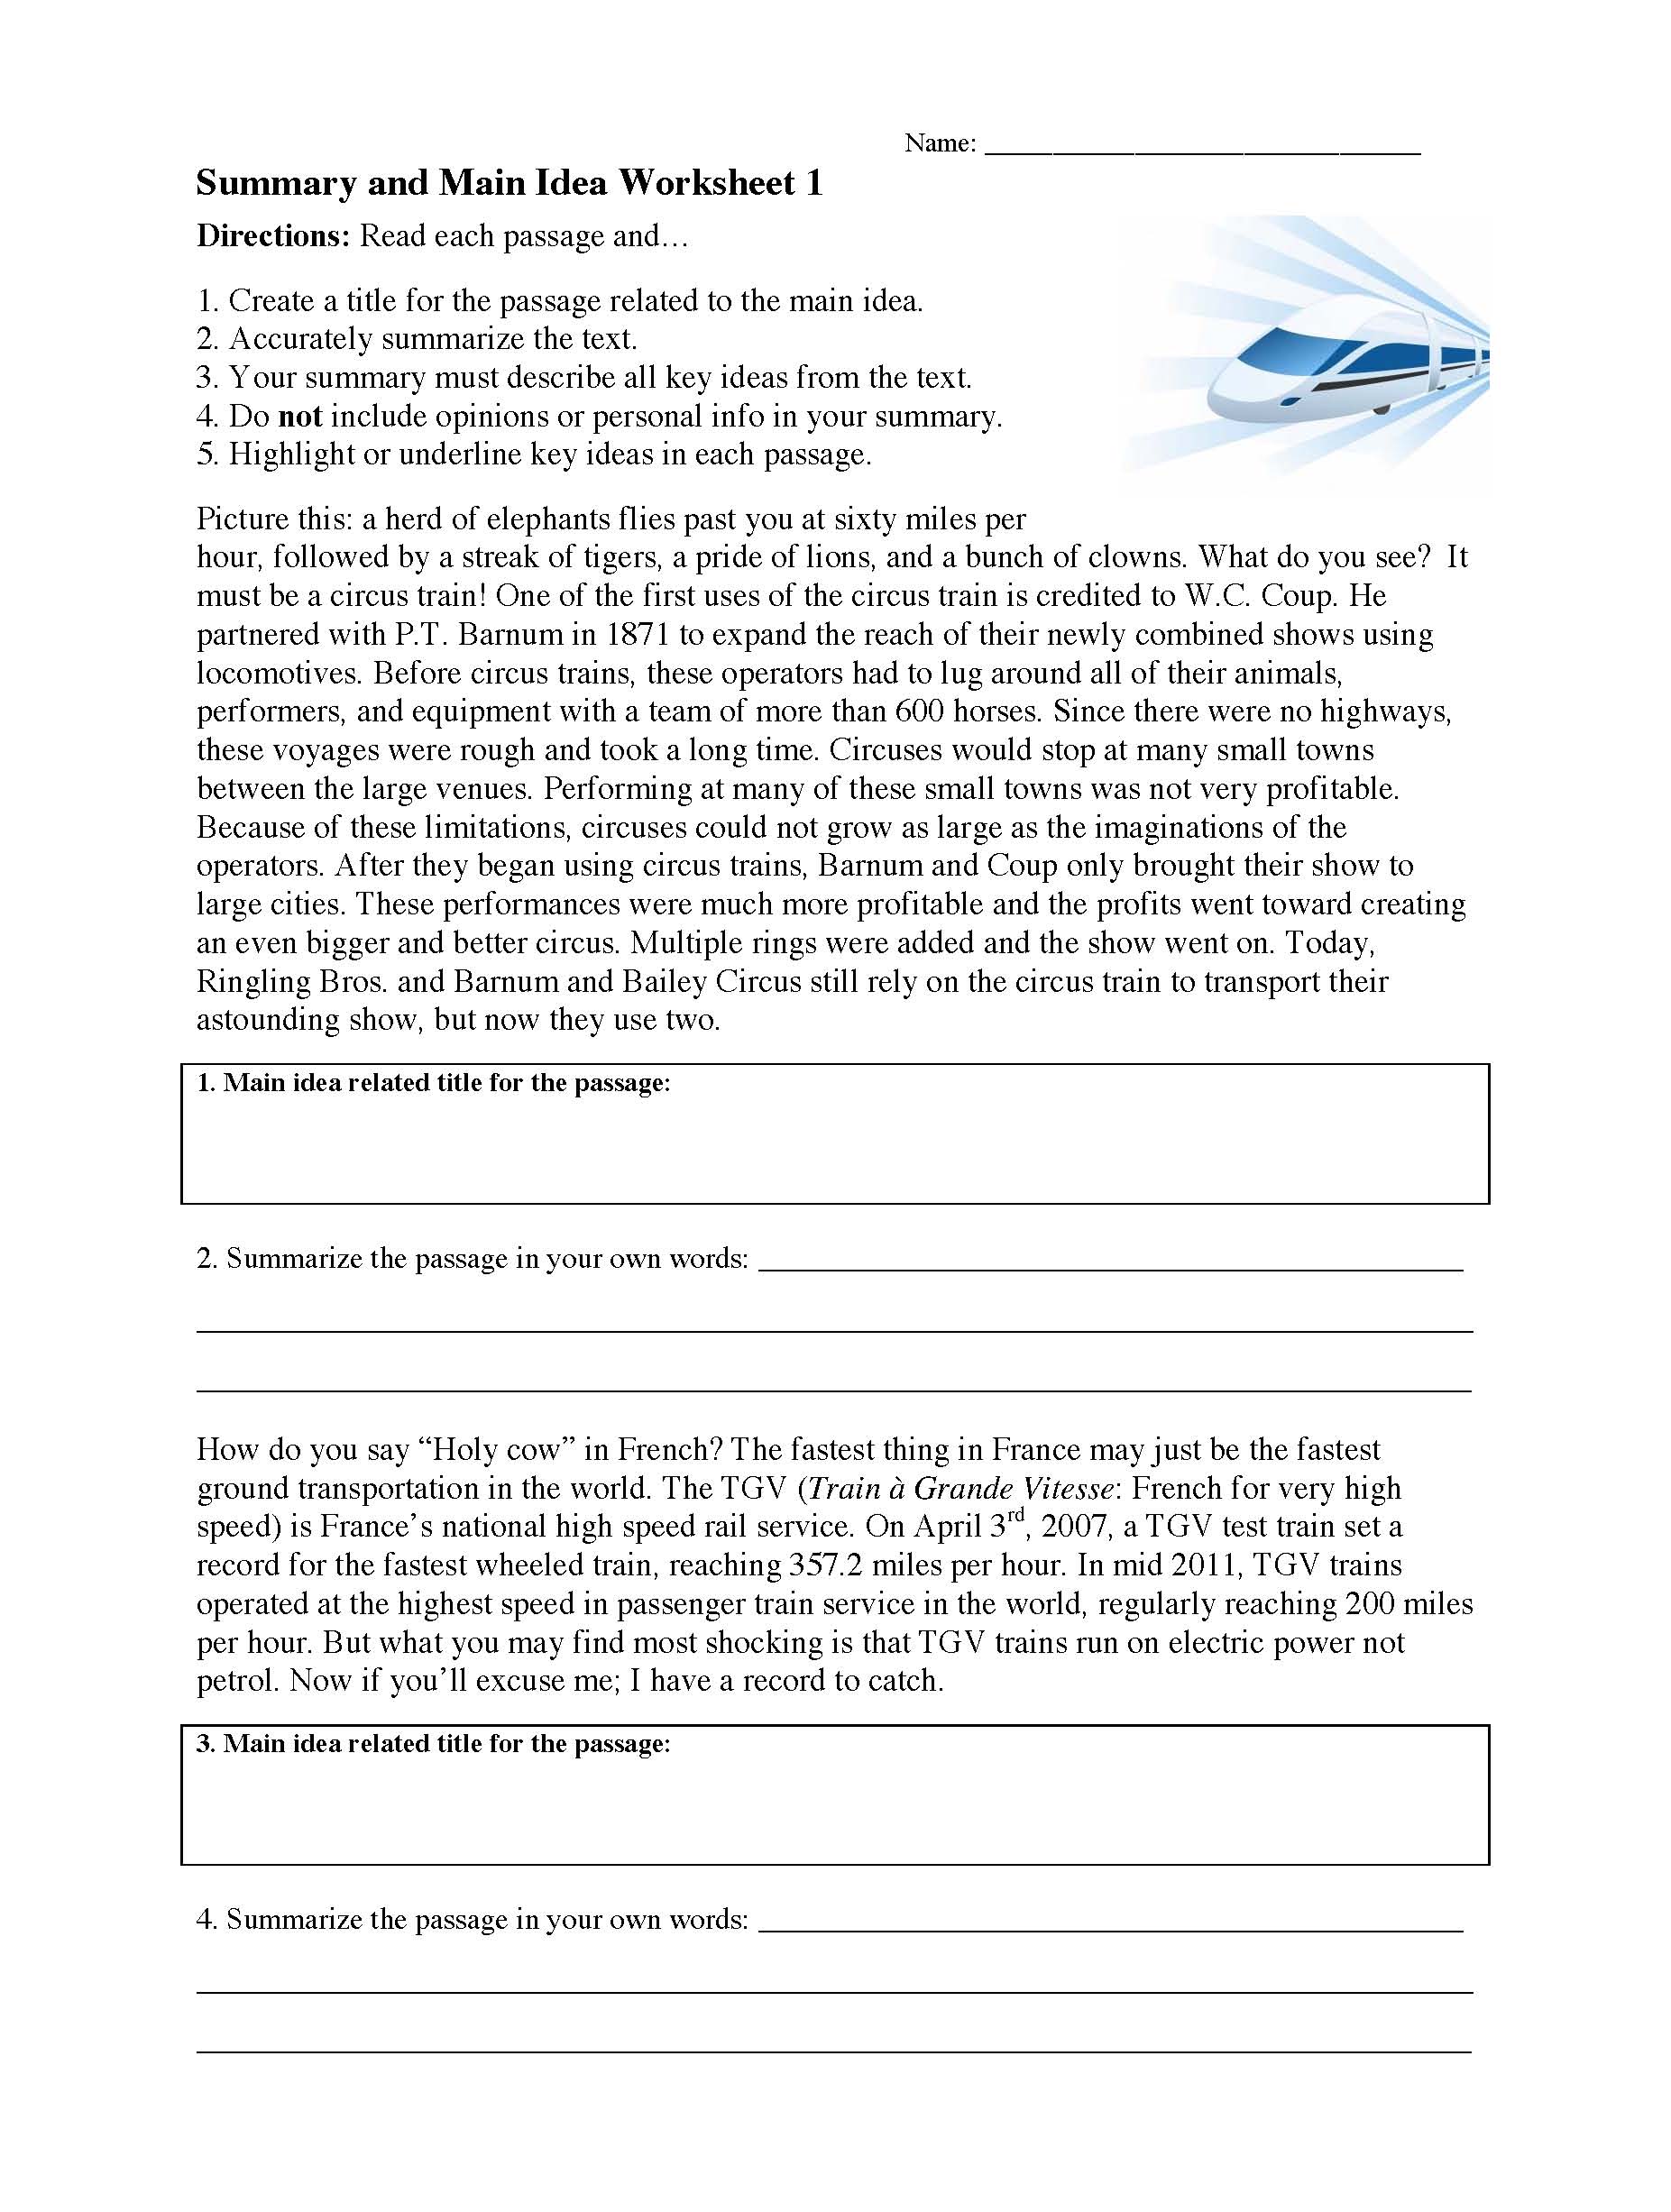 Summary and Main Idea Worksheet 1 | Preview